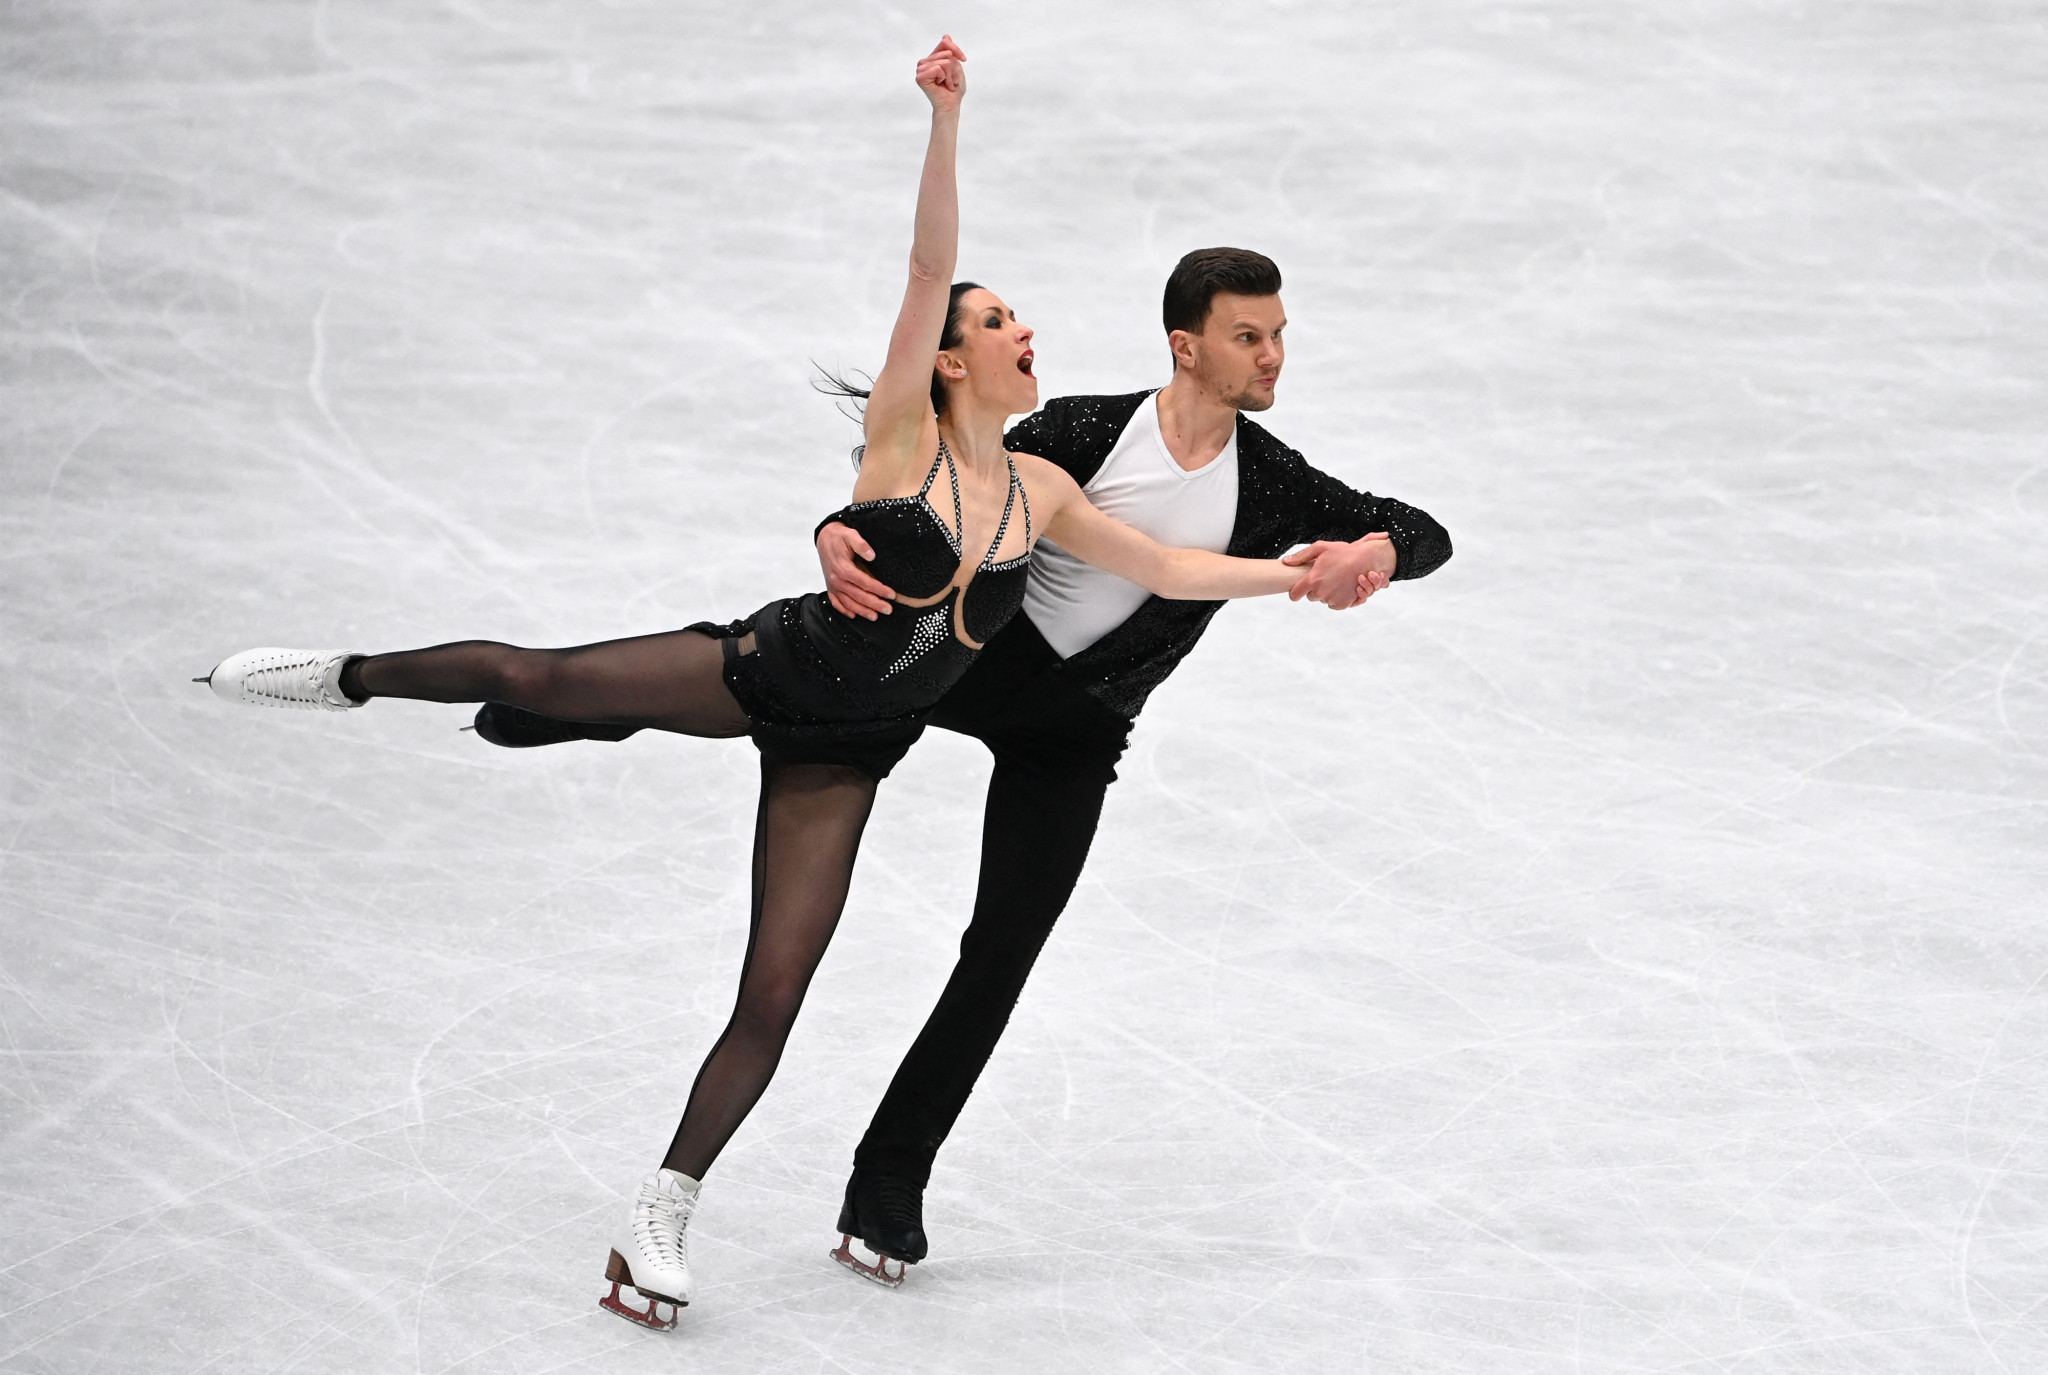 Sheffield is set to host the first ISU Grand Prix of Figure Skating ©Getty Images